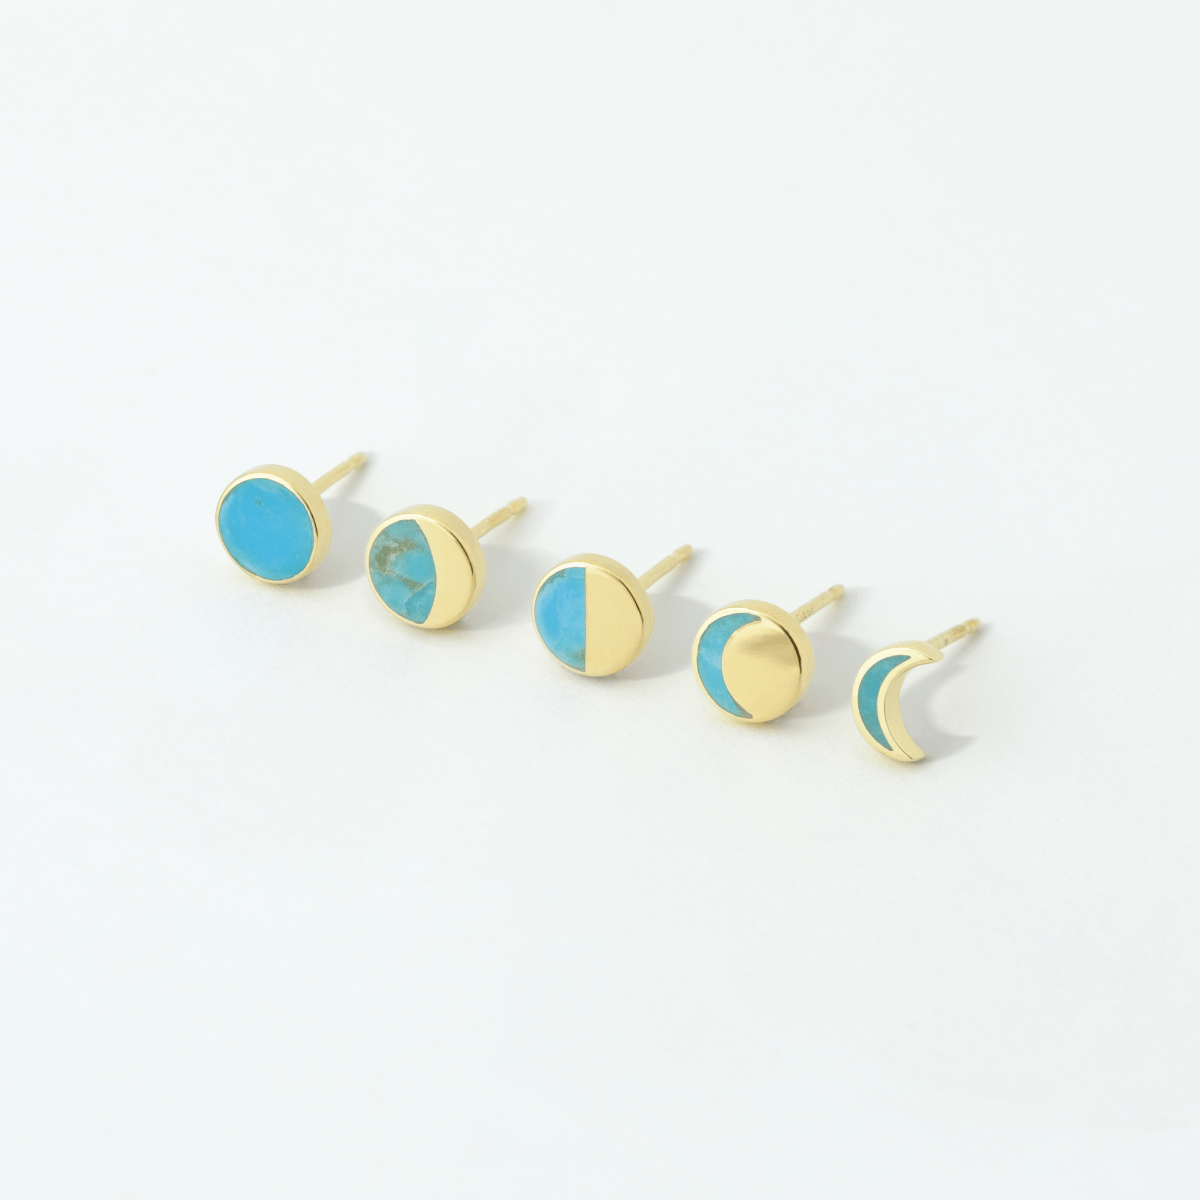 Boma Jewelry Earrings Belle Crescent Studs